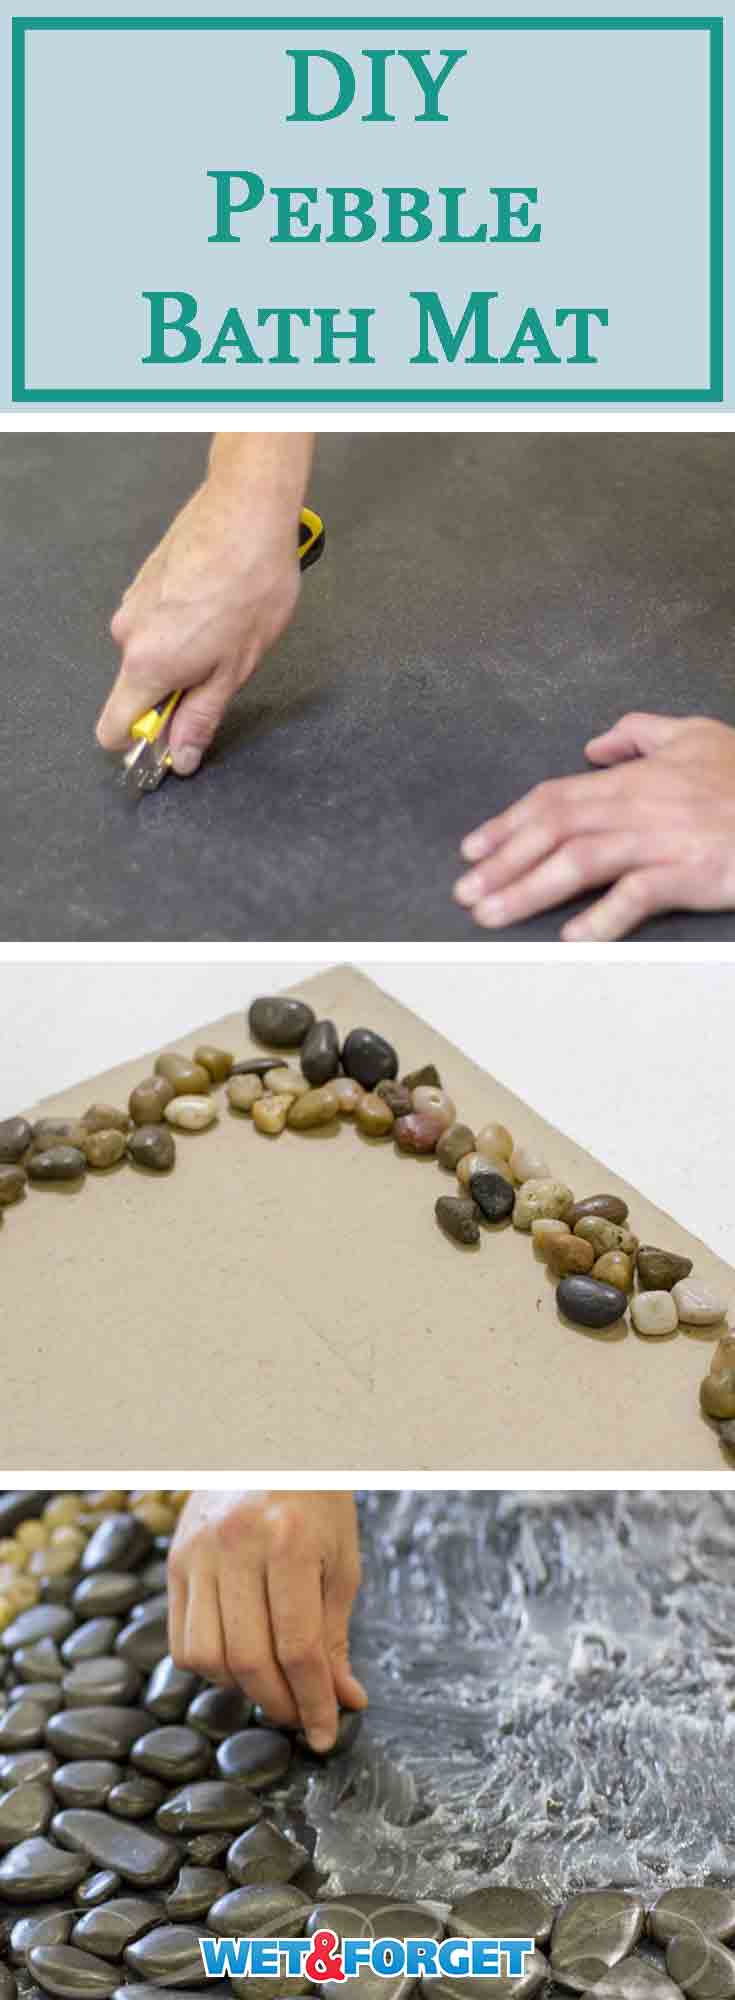 Renovating your bathroom takes too much time and the expenses add up quickly. This easy DIY pebble bath mat can update the look of your bathroom without spending too much. Check out our quick step by step pebble bath mat tutorial! 